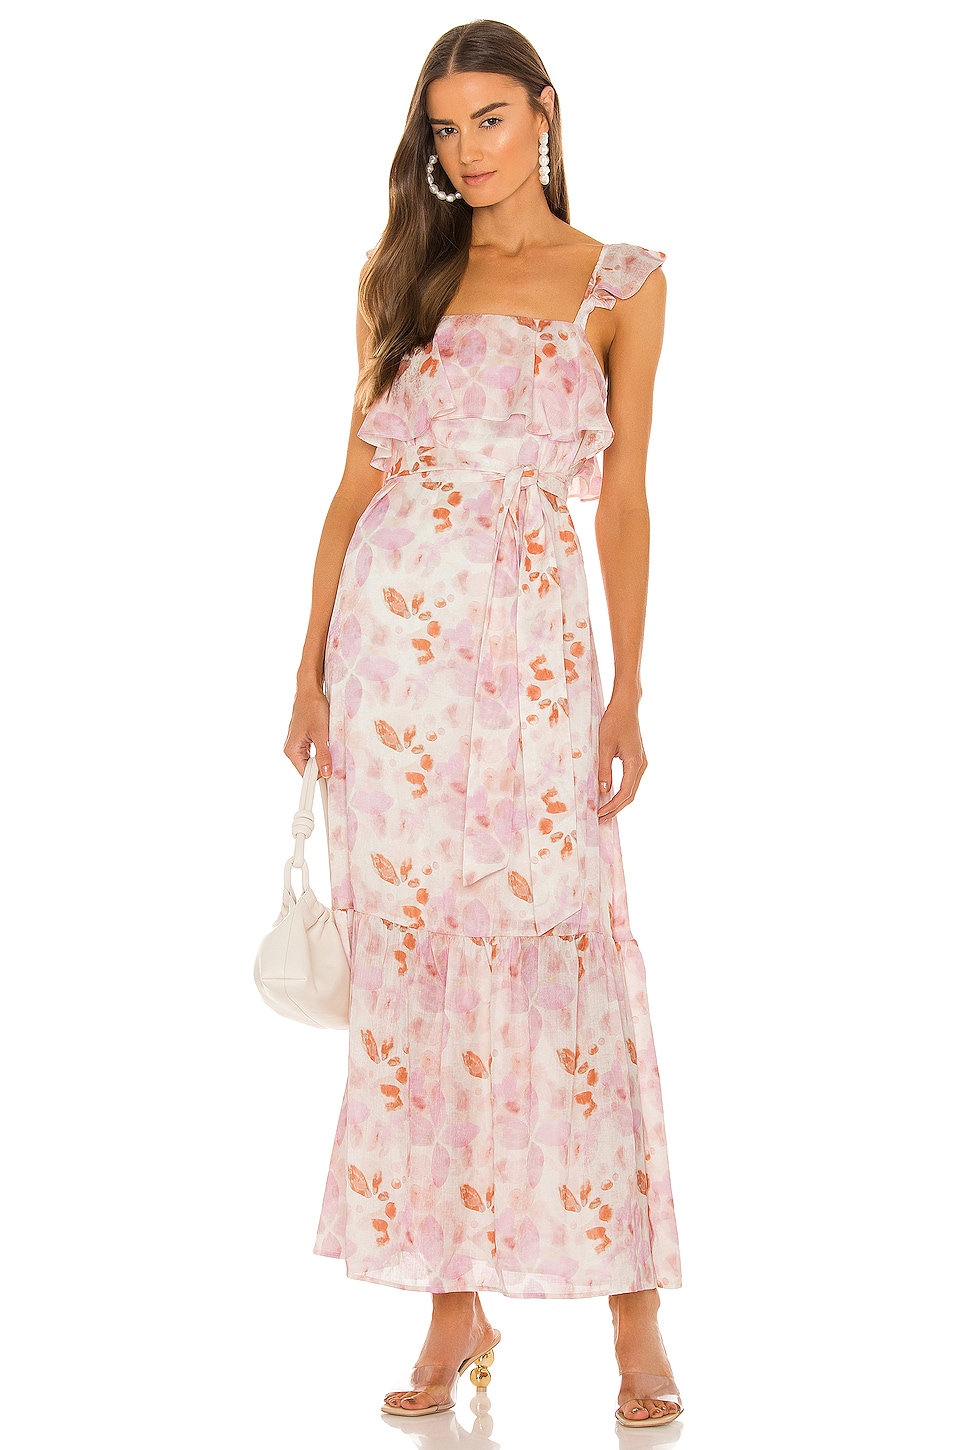 House of Harlow 1960 x Sofia Richie Evelyne Maxi Dress in Watercolor Floral